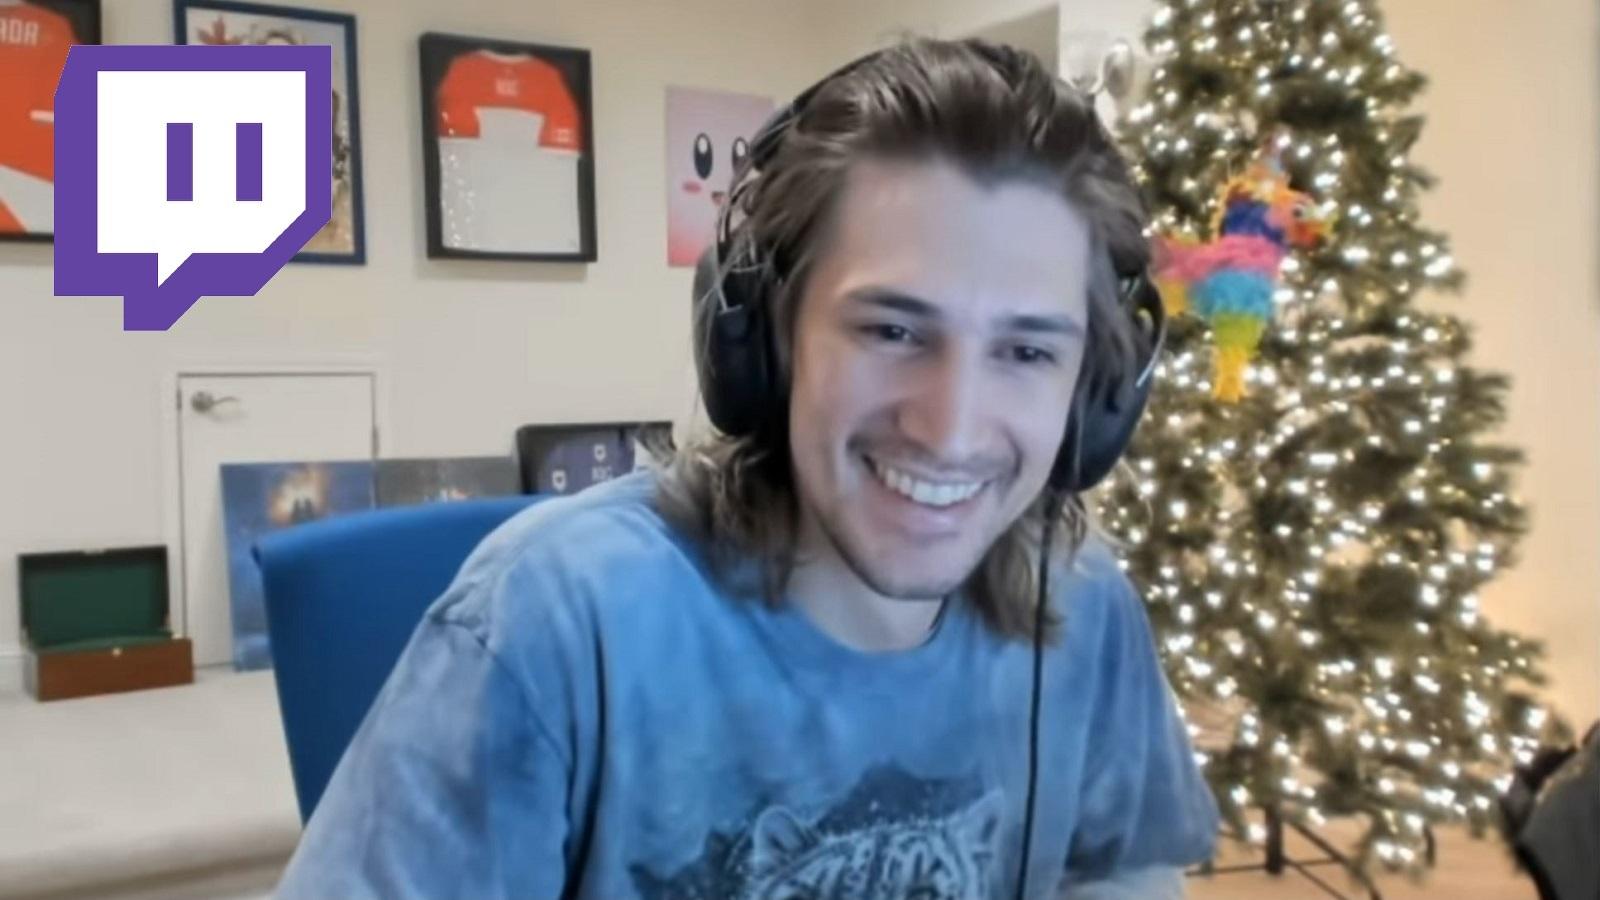 xQc dominates the first half of the year - Twitch viewership recap for H1  2021